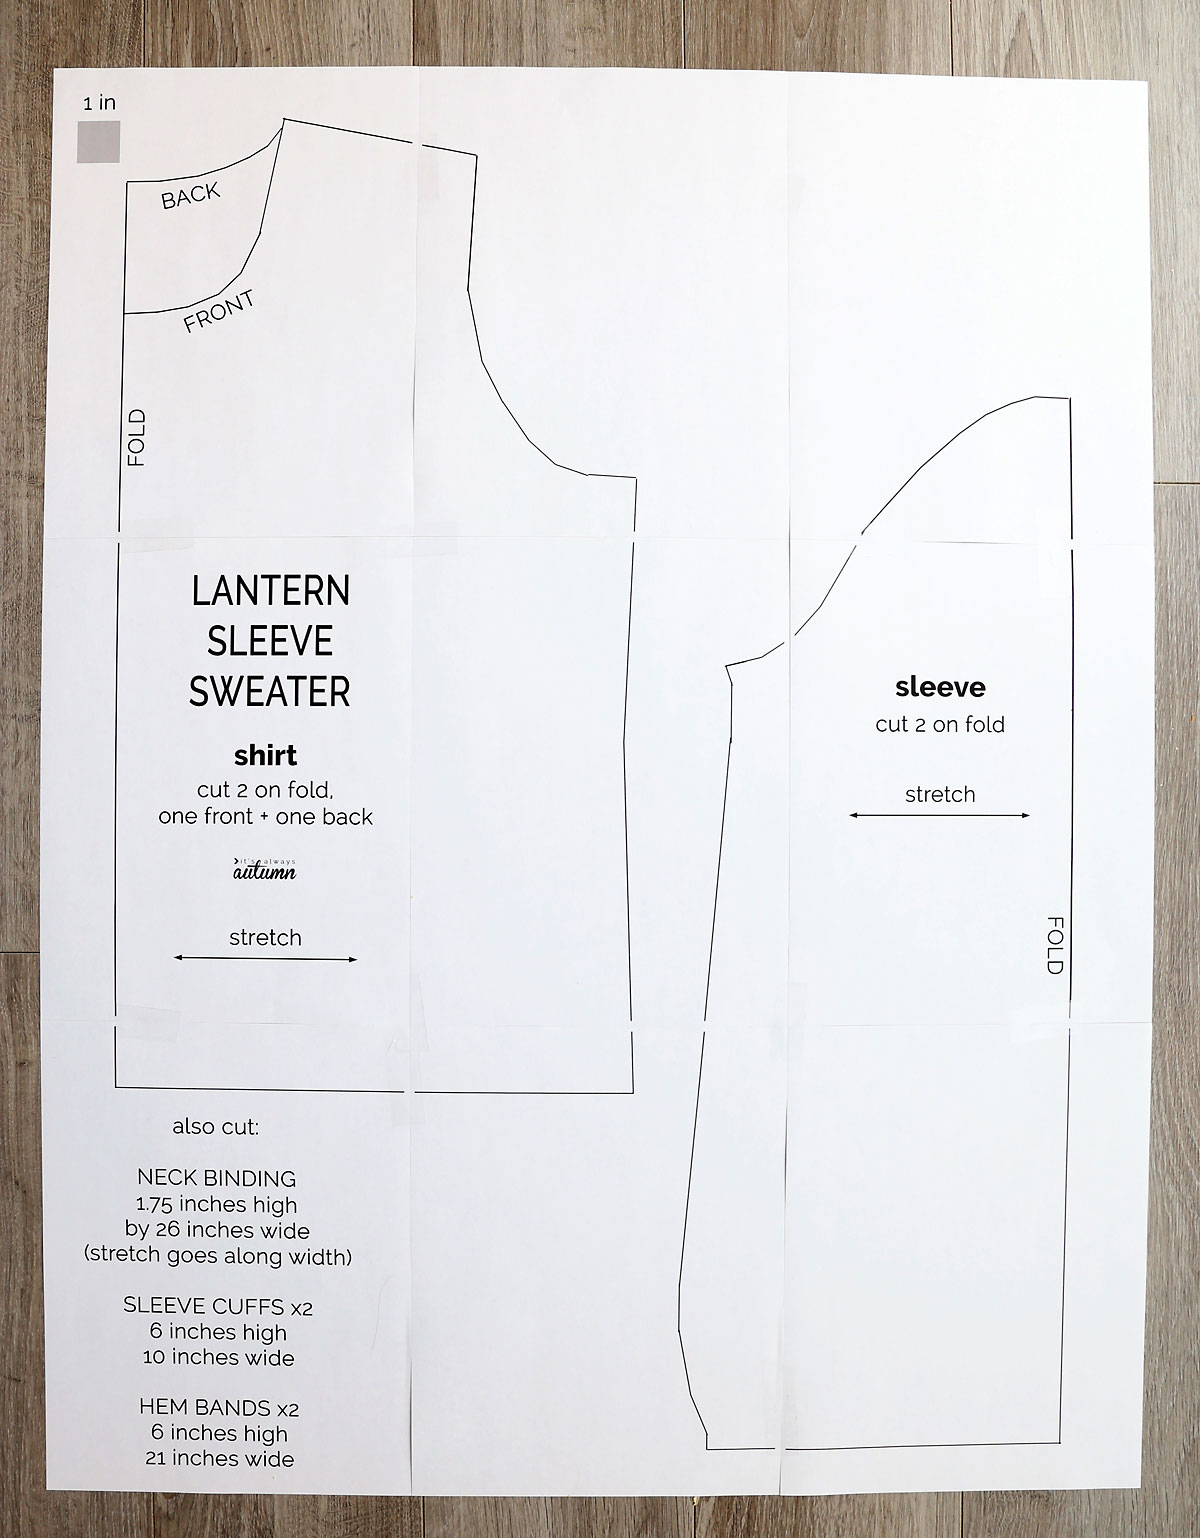 Lantern Sleeve Sweater sewing pattern printed out